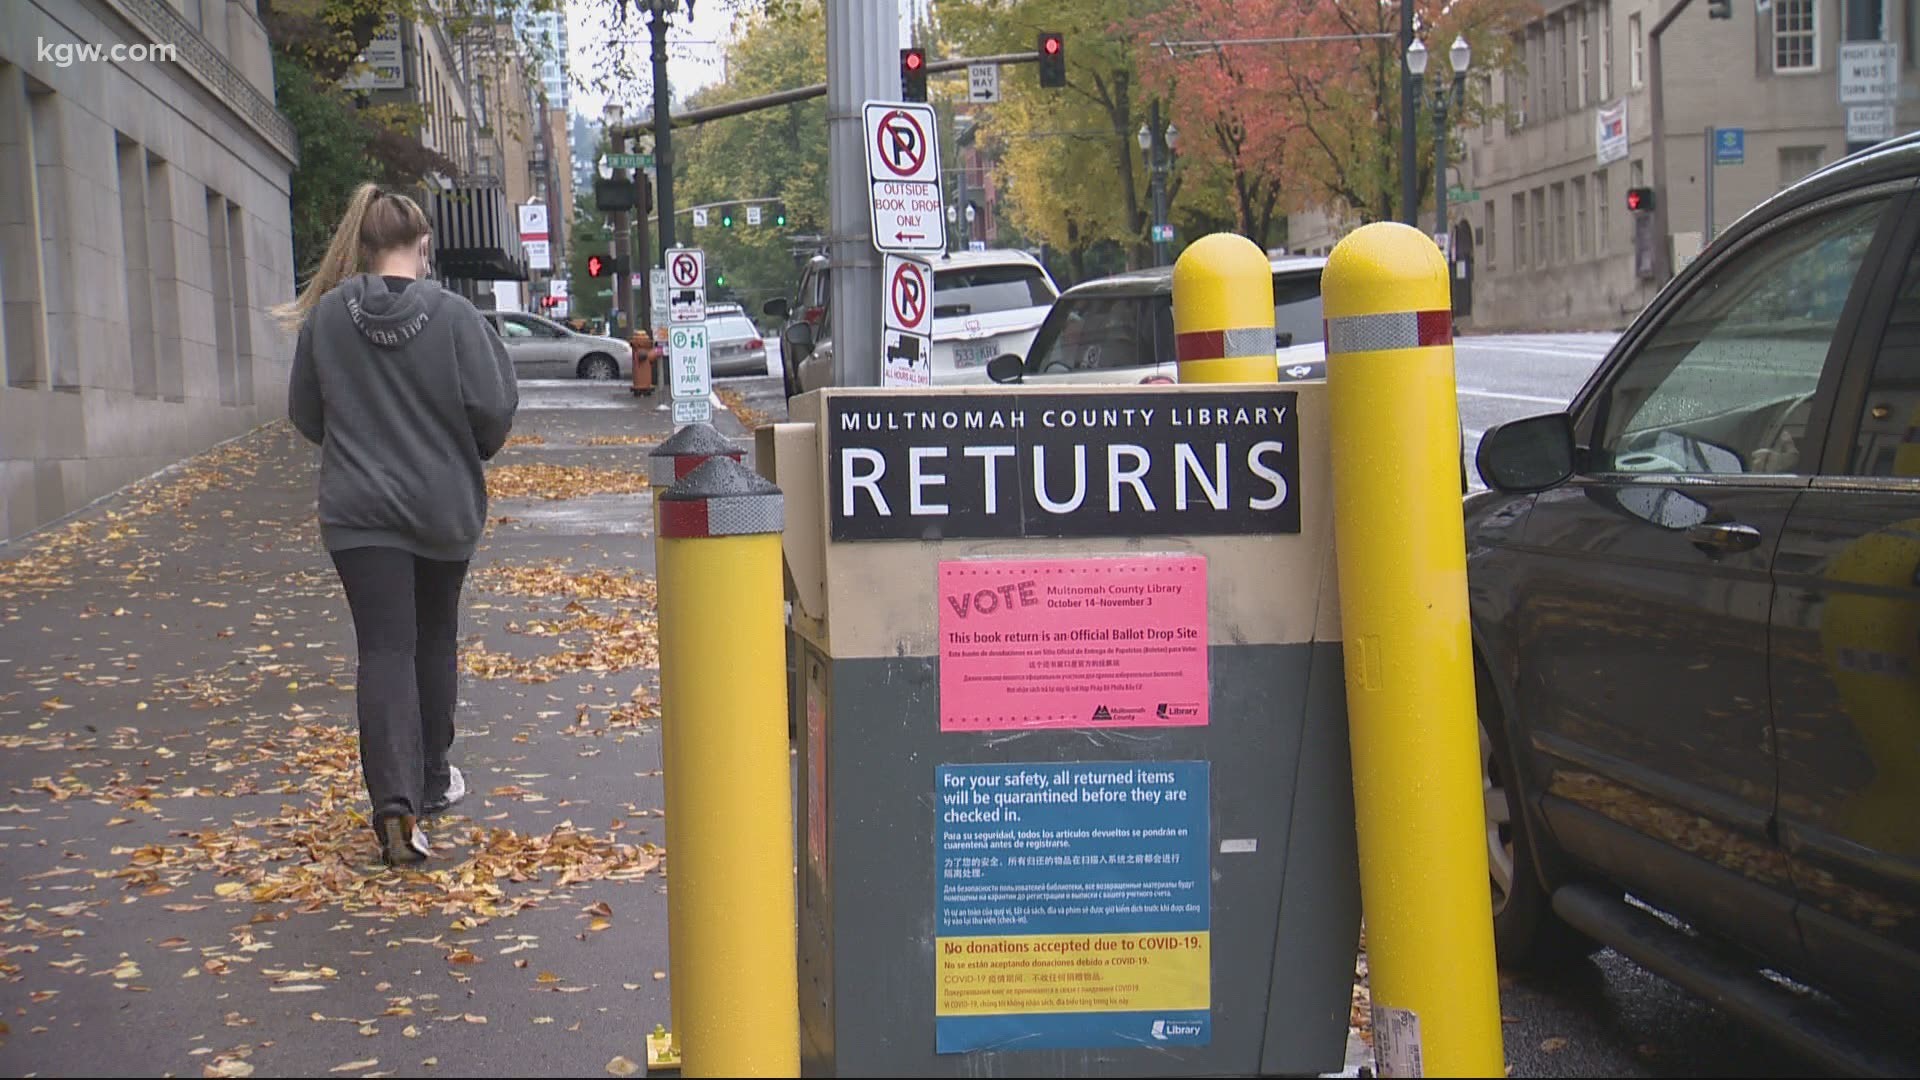 Some, but not all, library book drops have been designated as official drop boxes in Oregon.